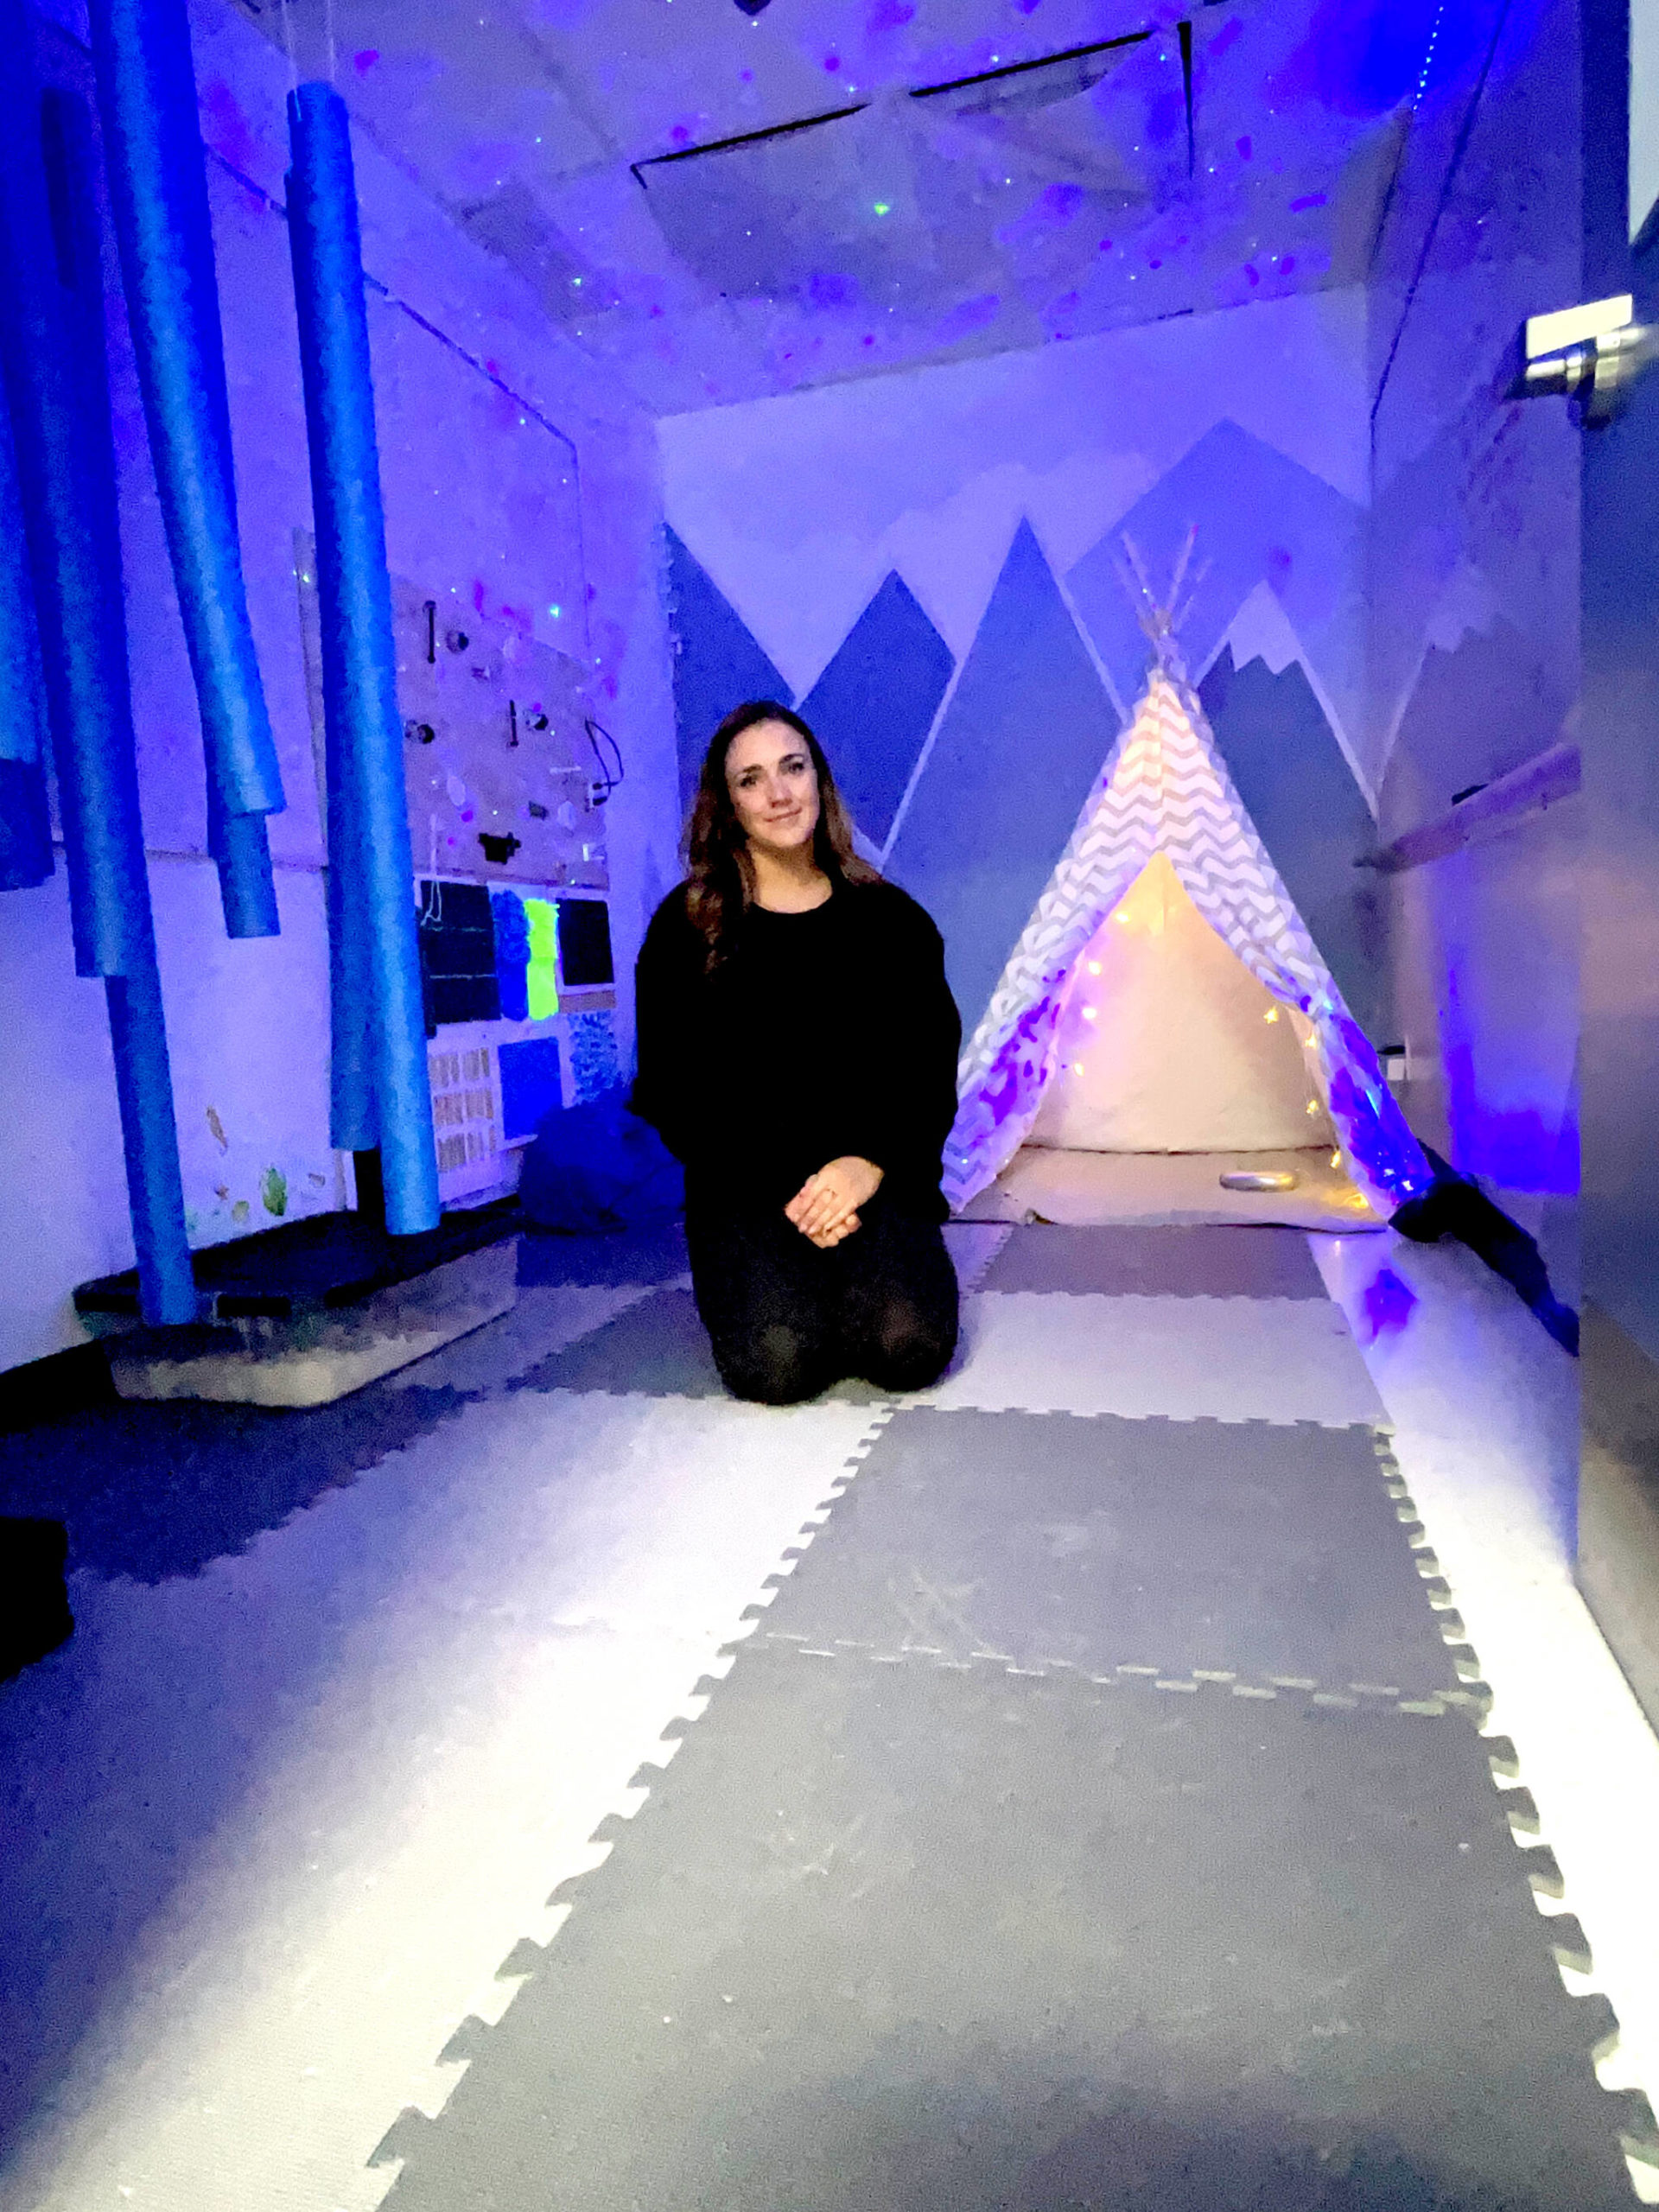 Allows the brain to reboot': New sensory room helps calm Sooke